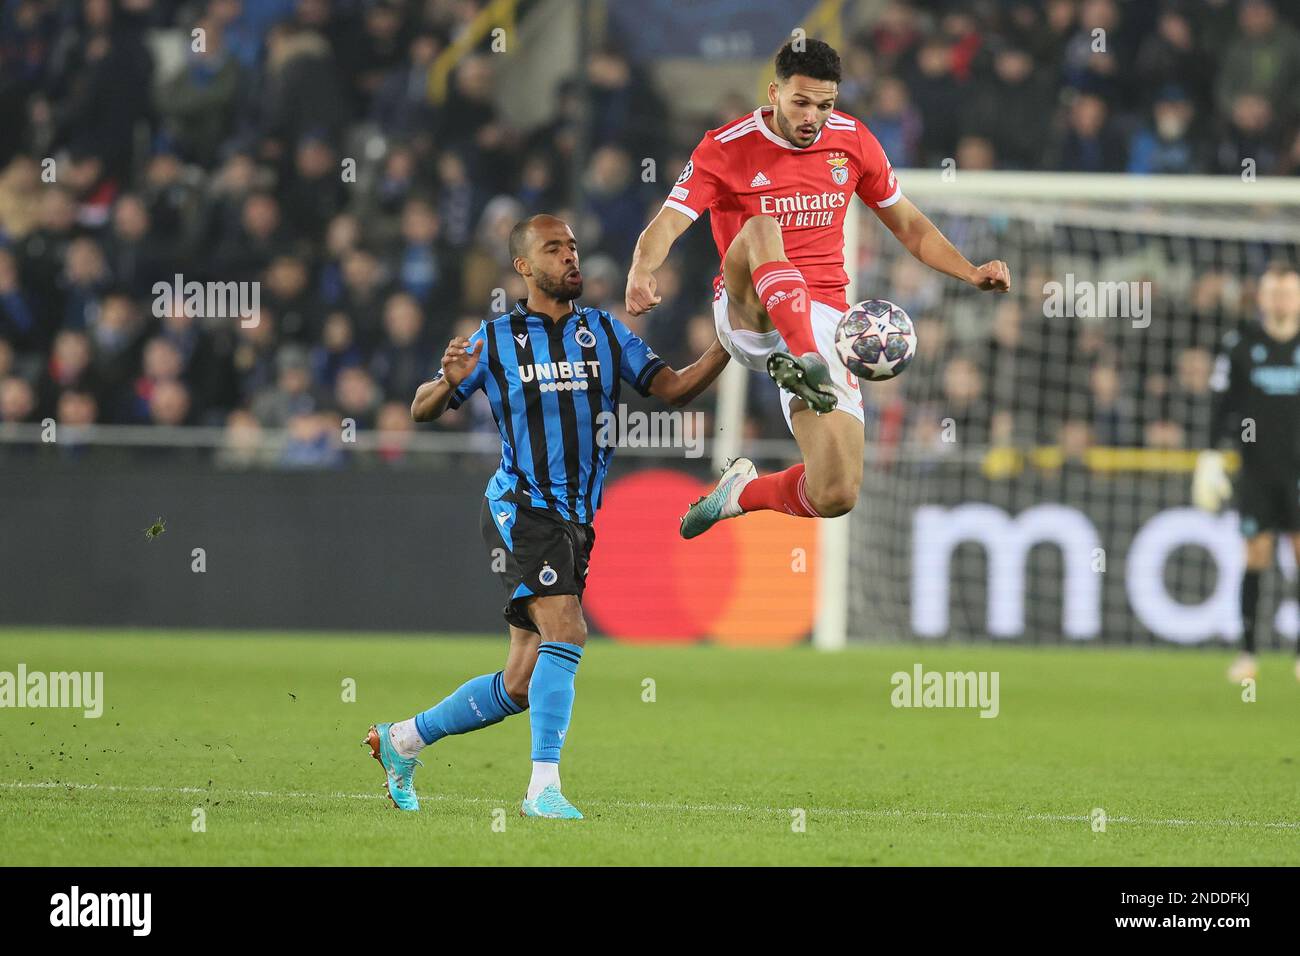 Club's Denis Odoi and Benfica's Goncalo Ramos fight for the ball during a soccer game between Belgian Club Brugge KV and Portuguese Sport Lisboa e Benfica, Wednesday 15 February 2023 in Brugge, the first leg of the round of 16 of the UEFA Champions League competition. BELGA PHOTO BRUNO FAHY Stock Photo